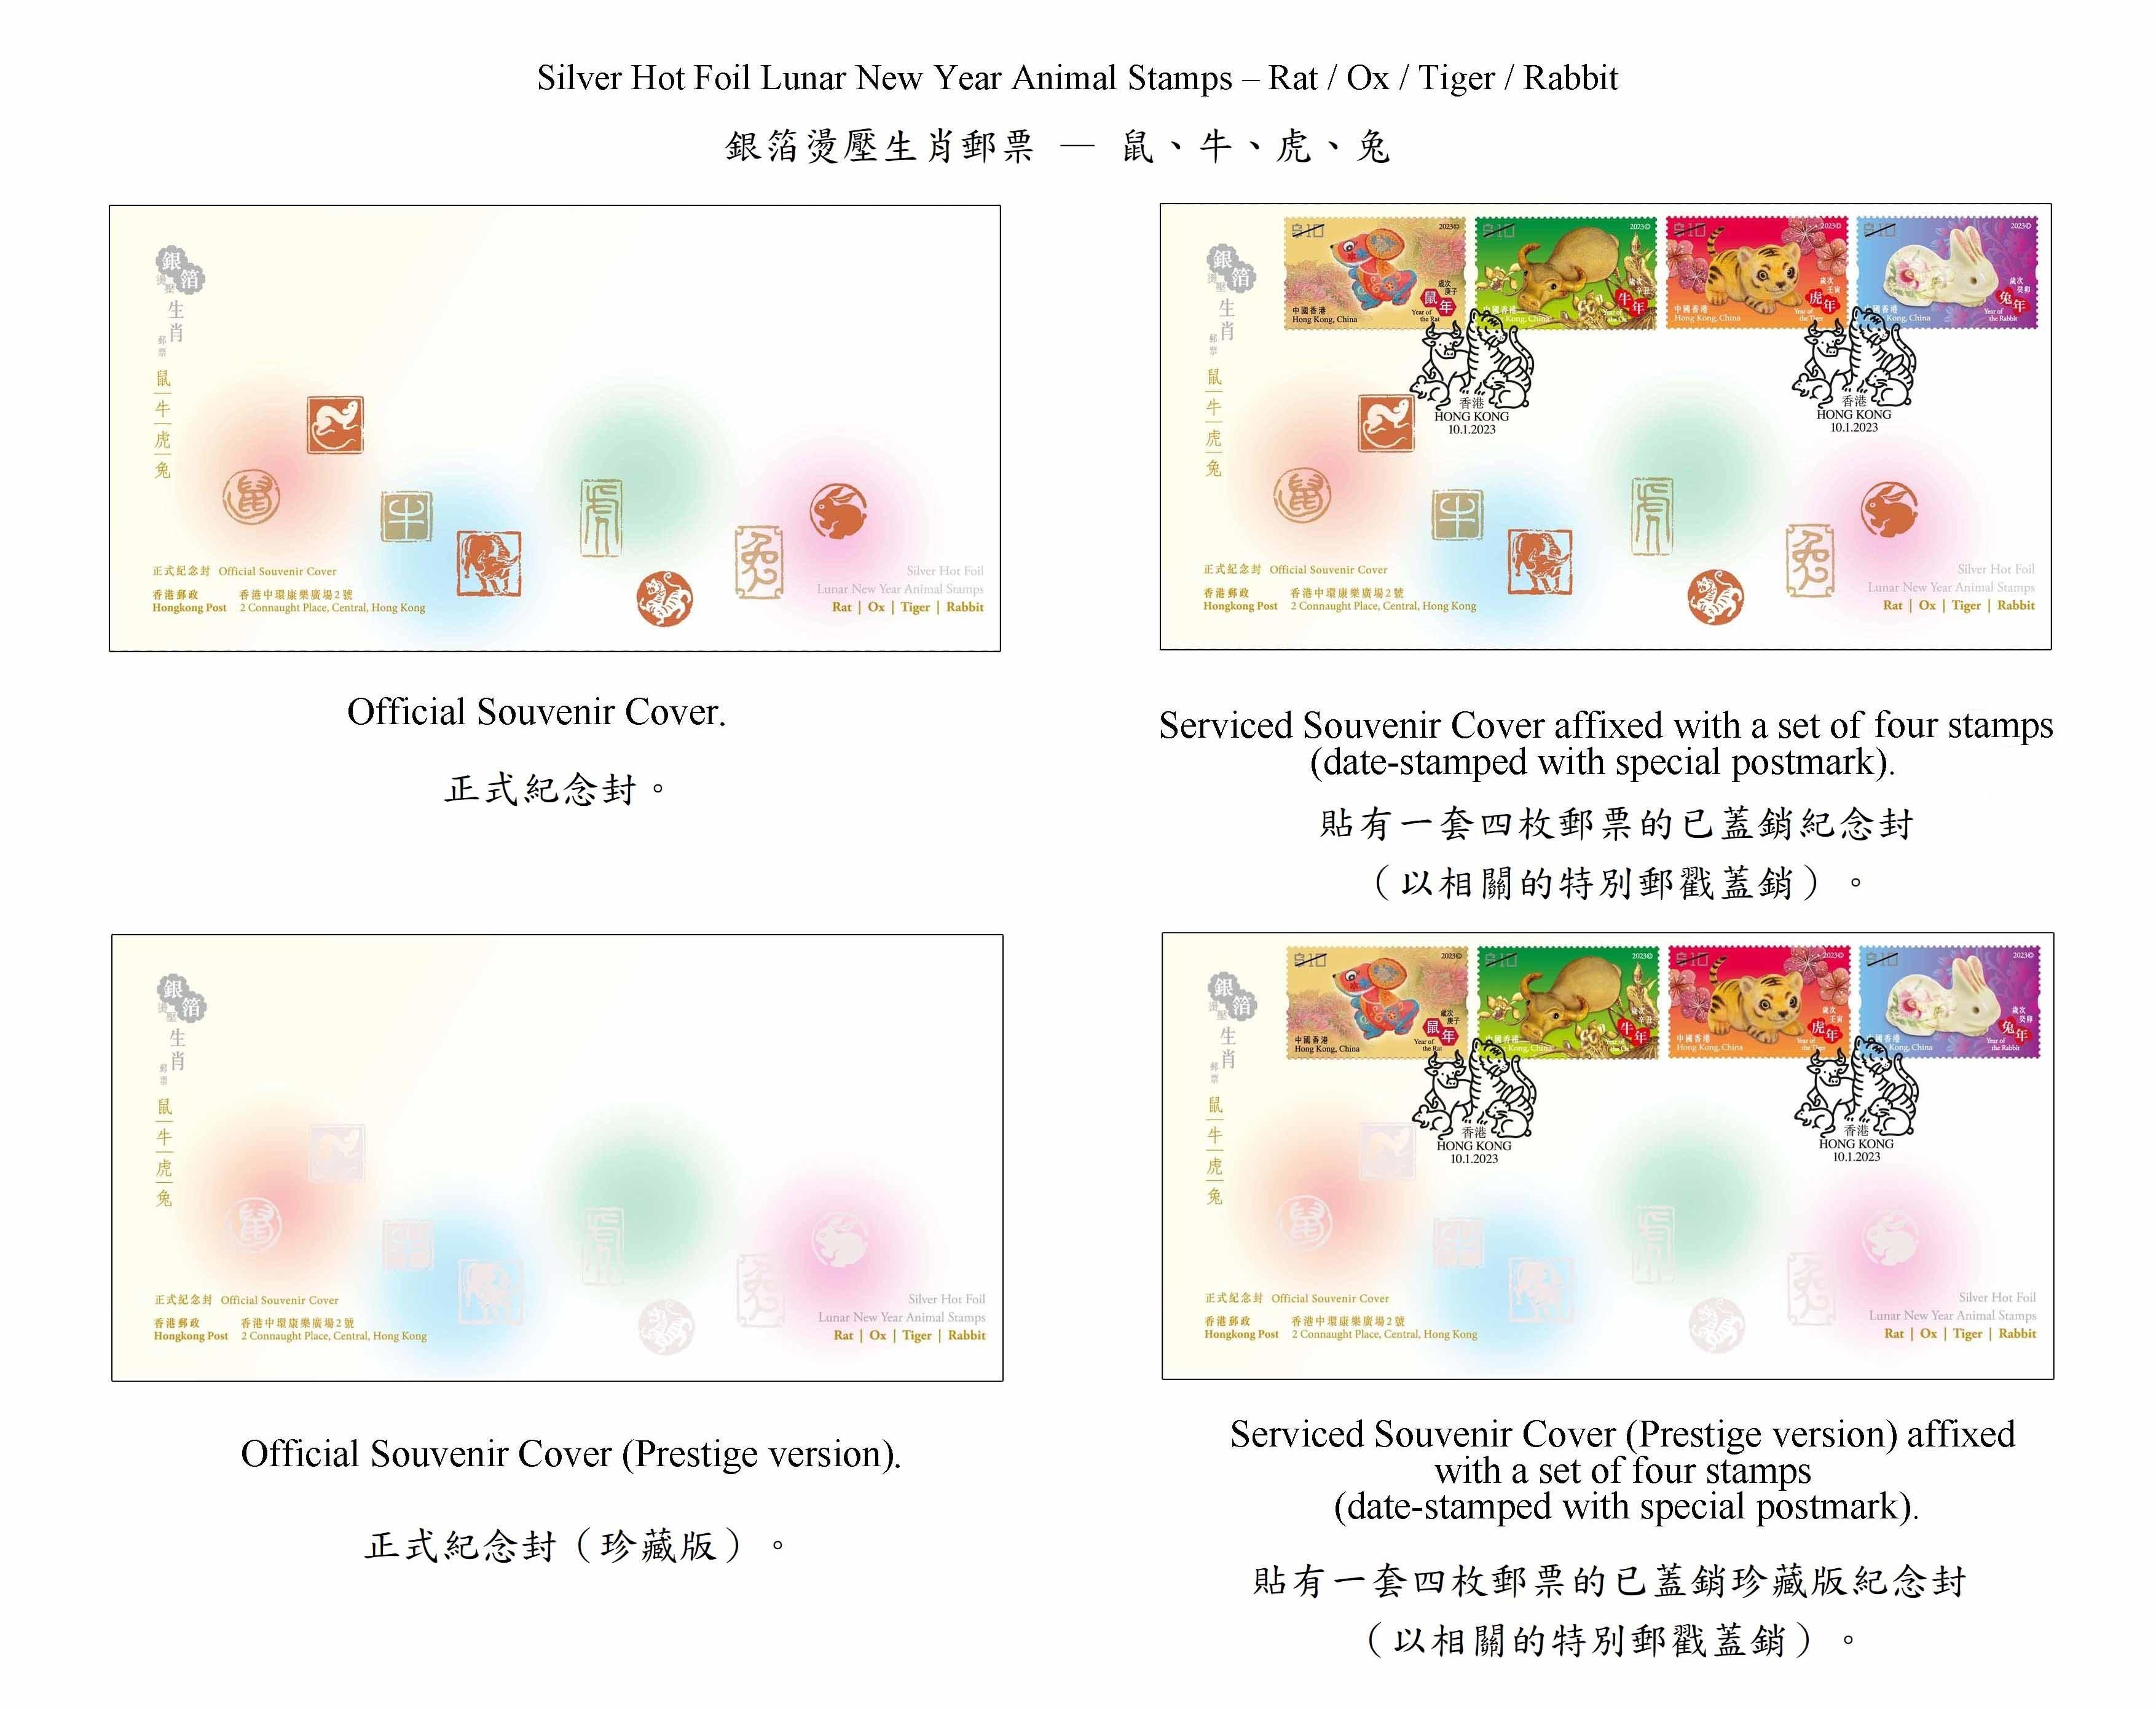 Hongkong Post will launch a special stamp issue and associated philatelic products with the theme "Year of the Rabbit" on January 10, 2023 (Tuesday). The "Silver Hot Foil Lunar New Year Animal Stamps - Rat/Ox/Tiger/Rabbit" will also be launched on the same day. Photo shows the souvenir covers and the prestige souvenir covers.
